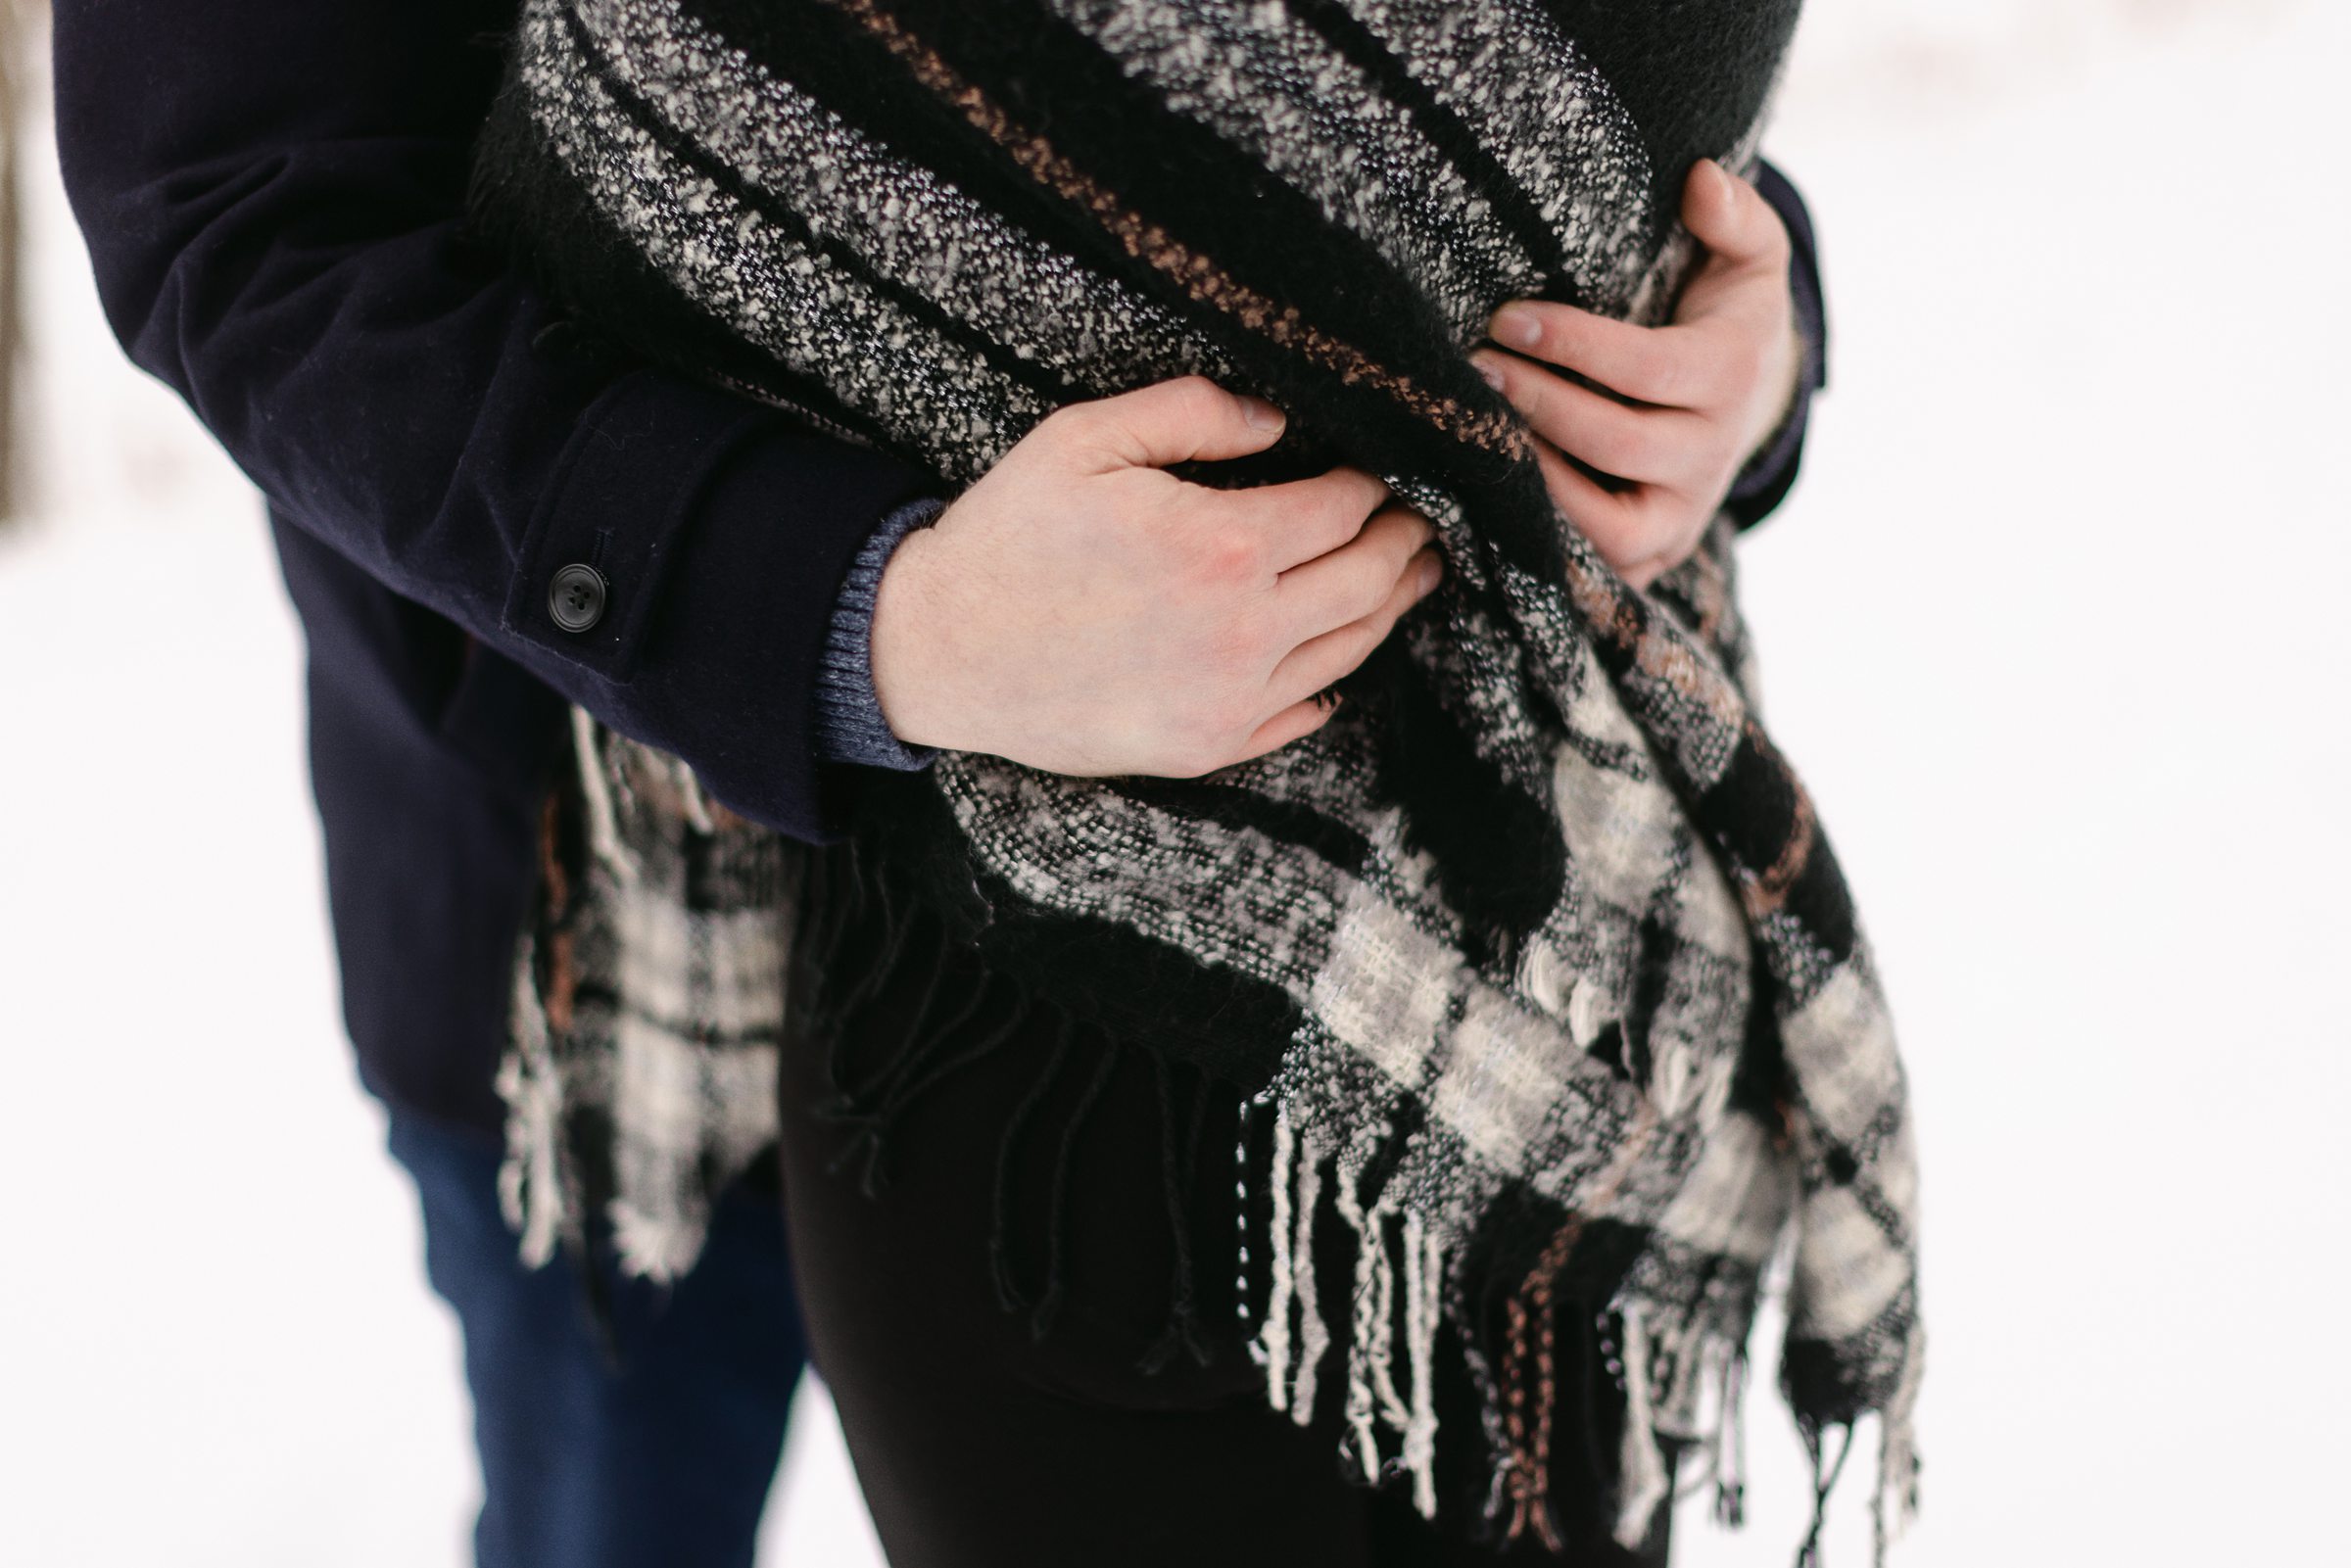 snuggling couple during their kensington winter engagement session by Michele Maloney Photography